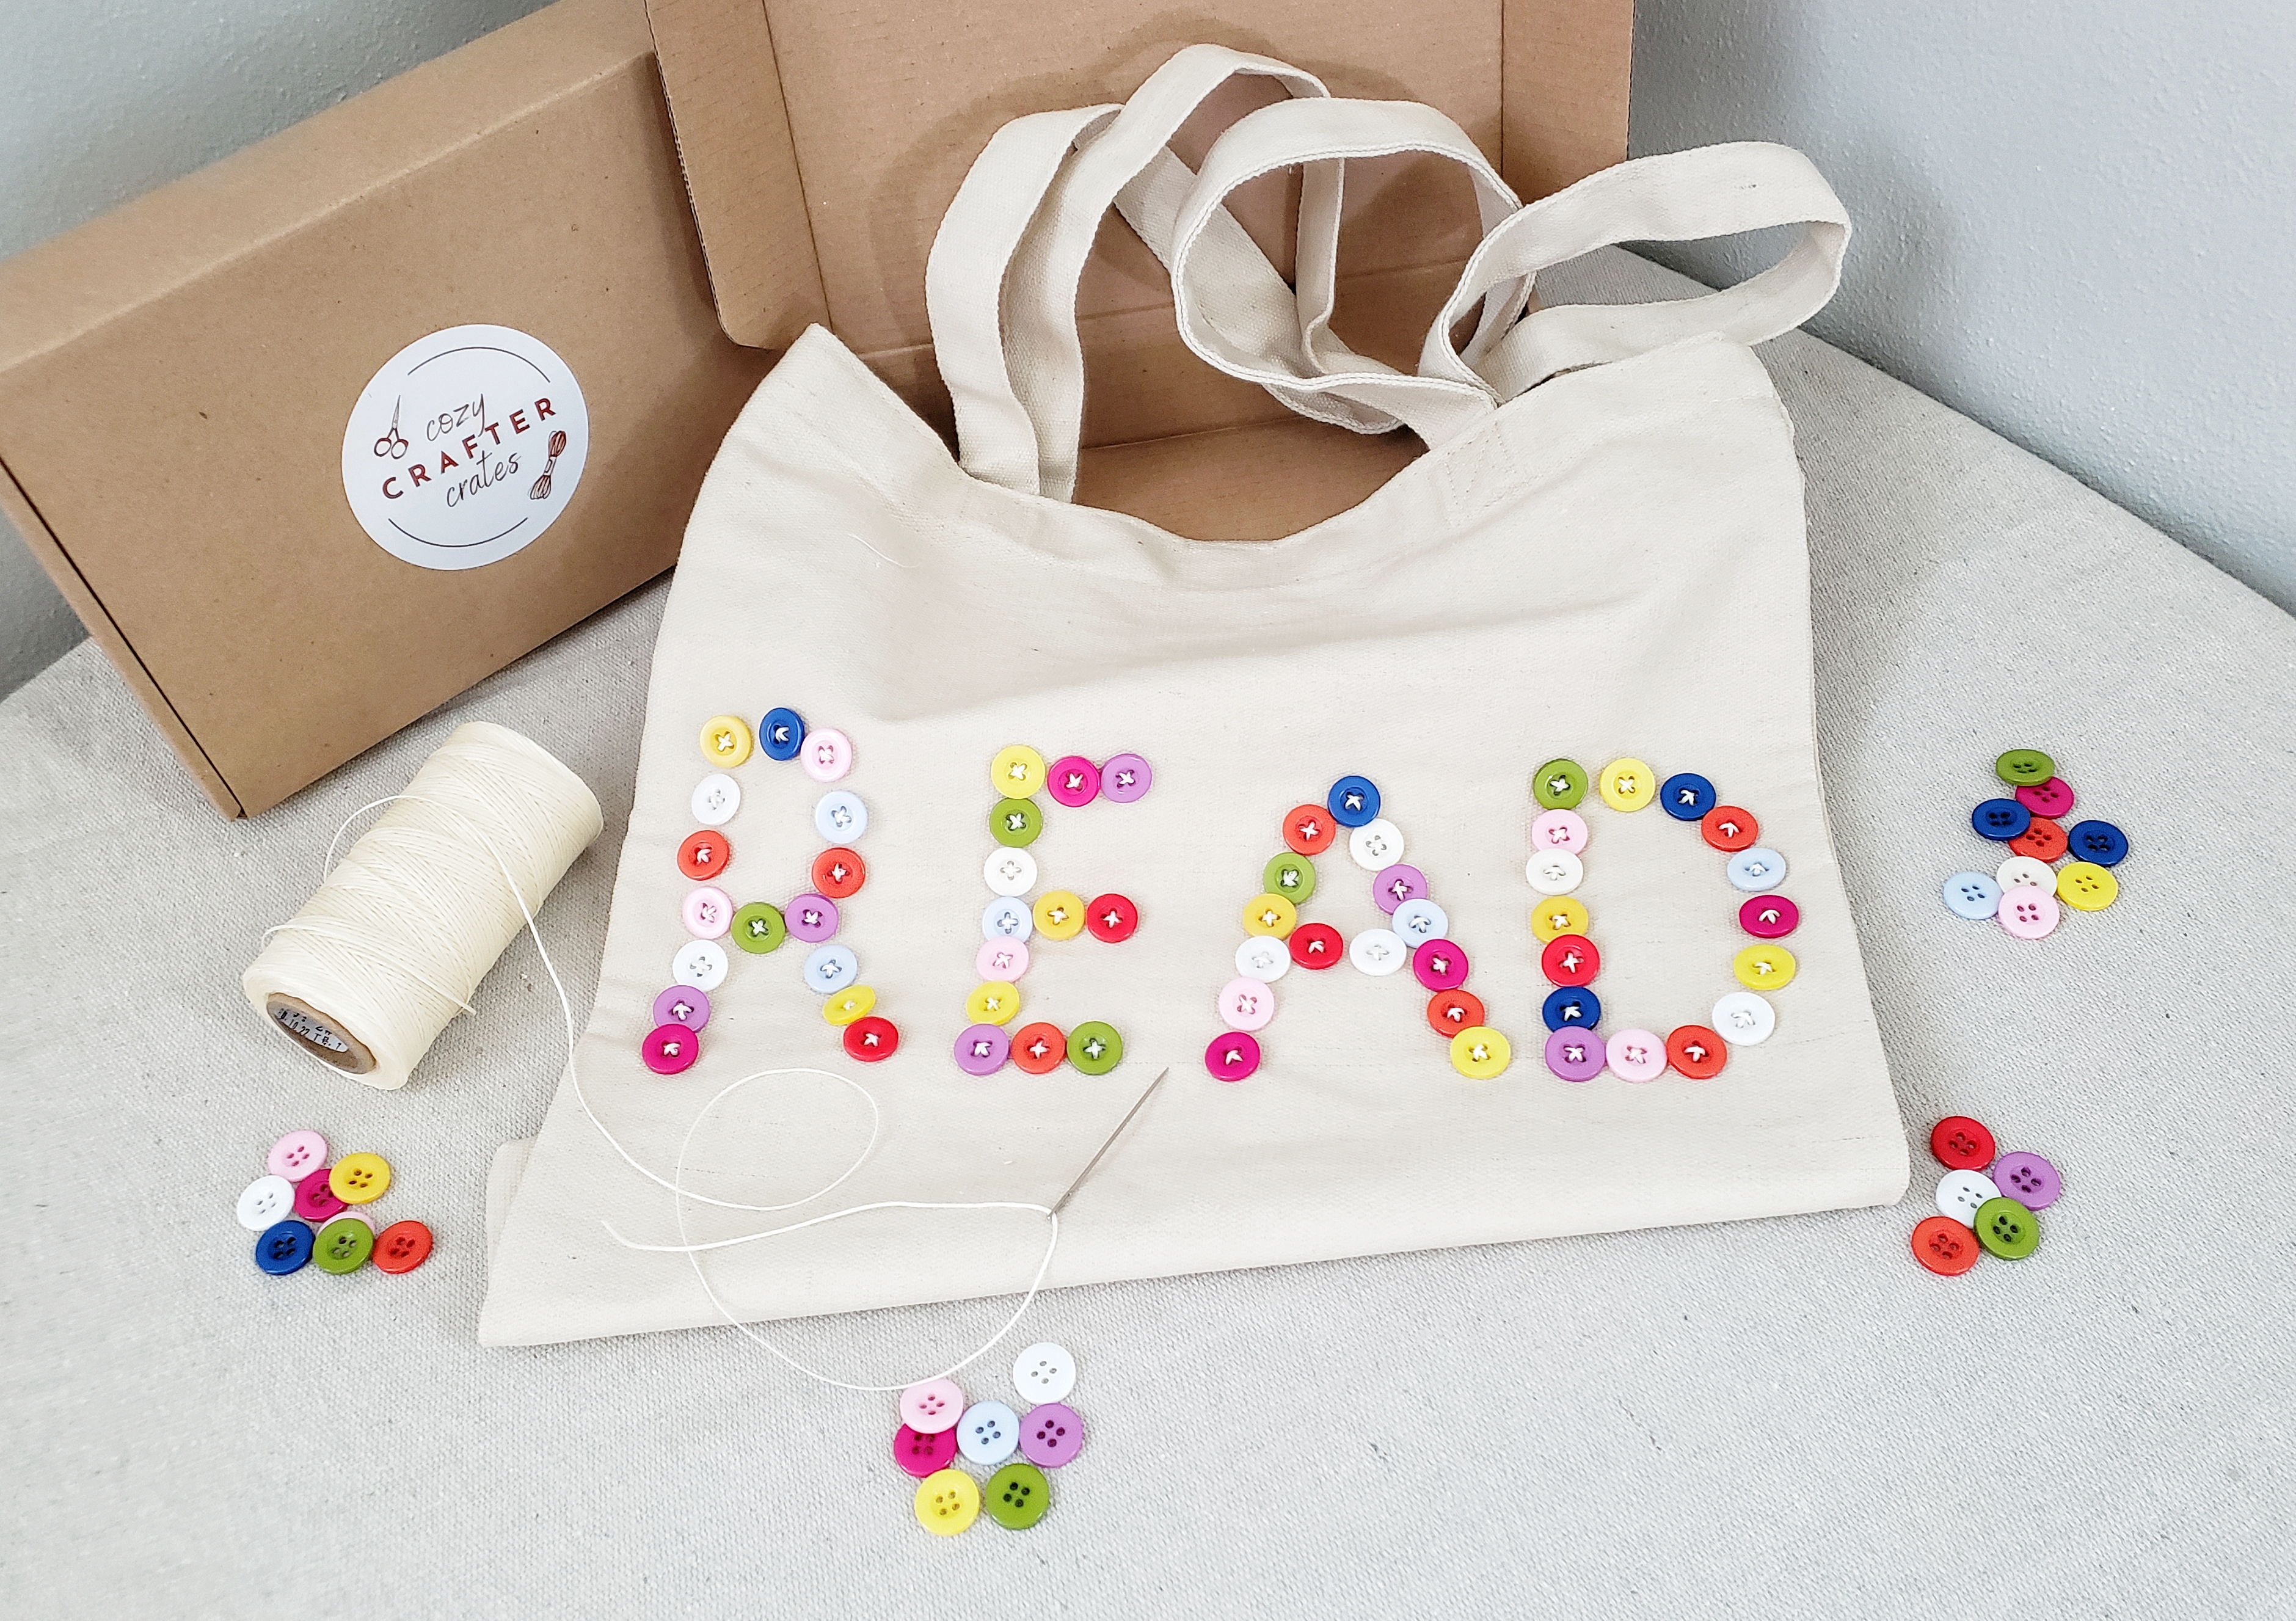 handicraft kit containing all the supplies to learn to sew on buttons